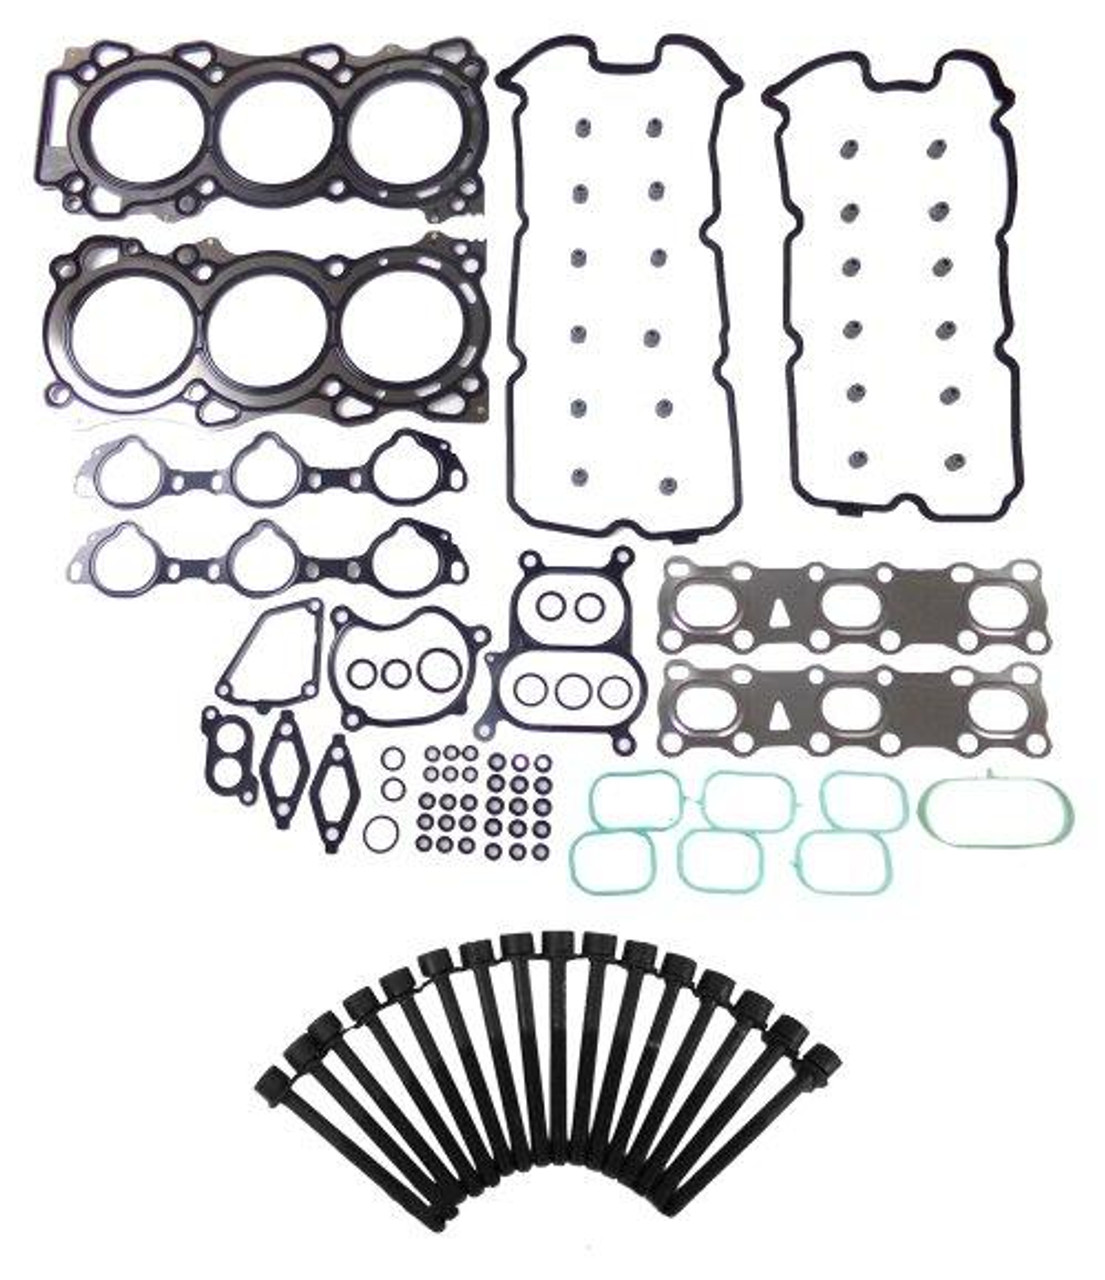 Head Gasket Set with Head Bolt Kit - 2015 Nissan Frontier 4.0L Engine Parts # HGB648ZE11